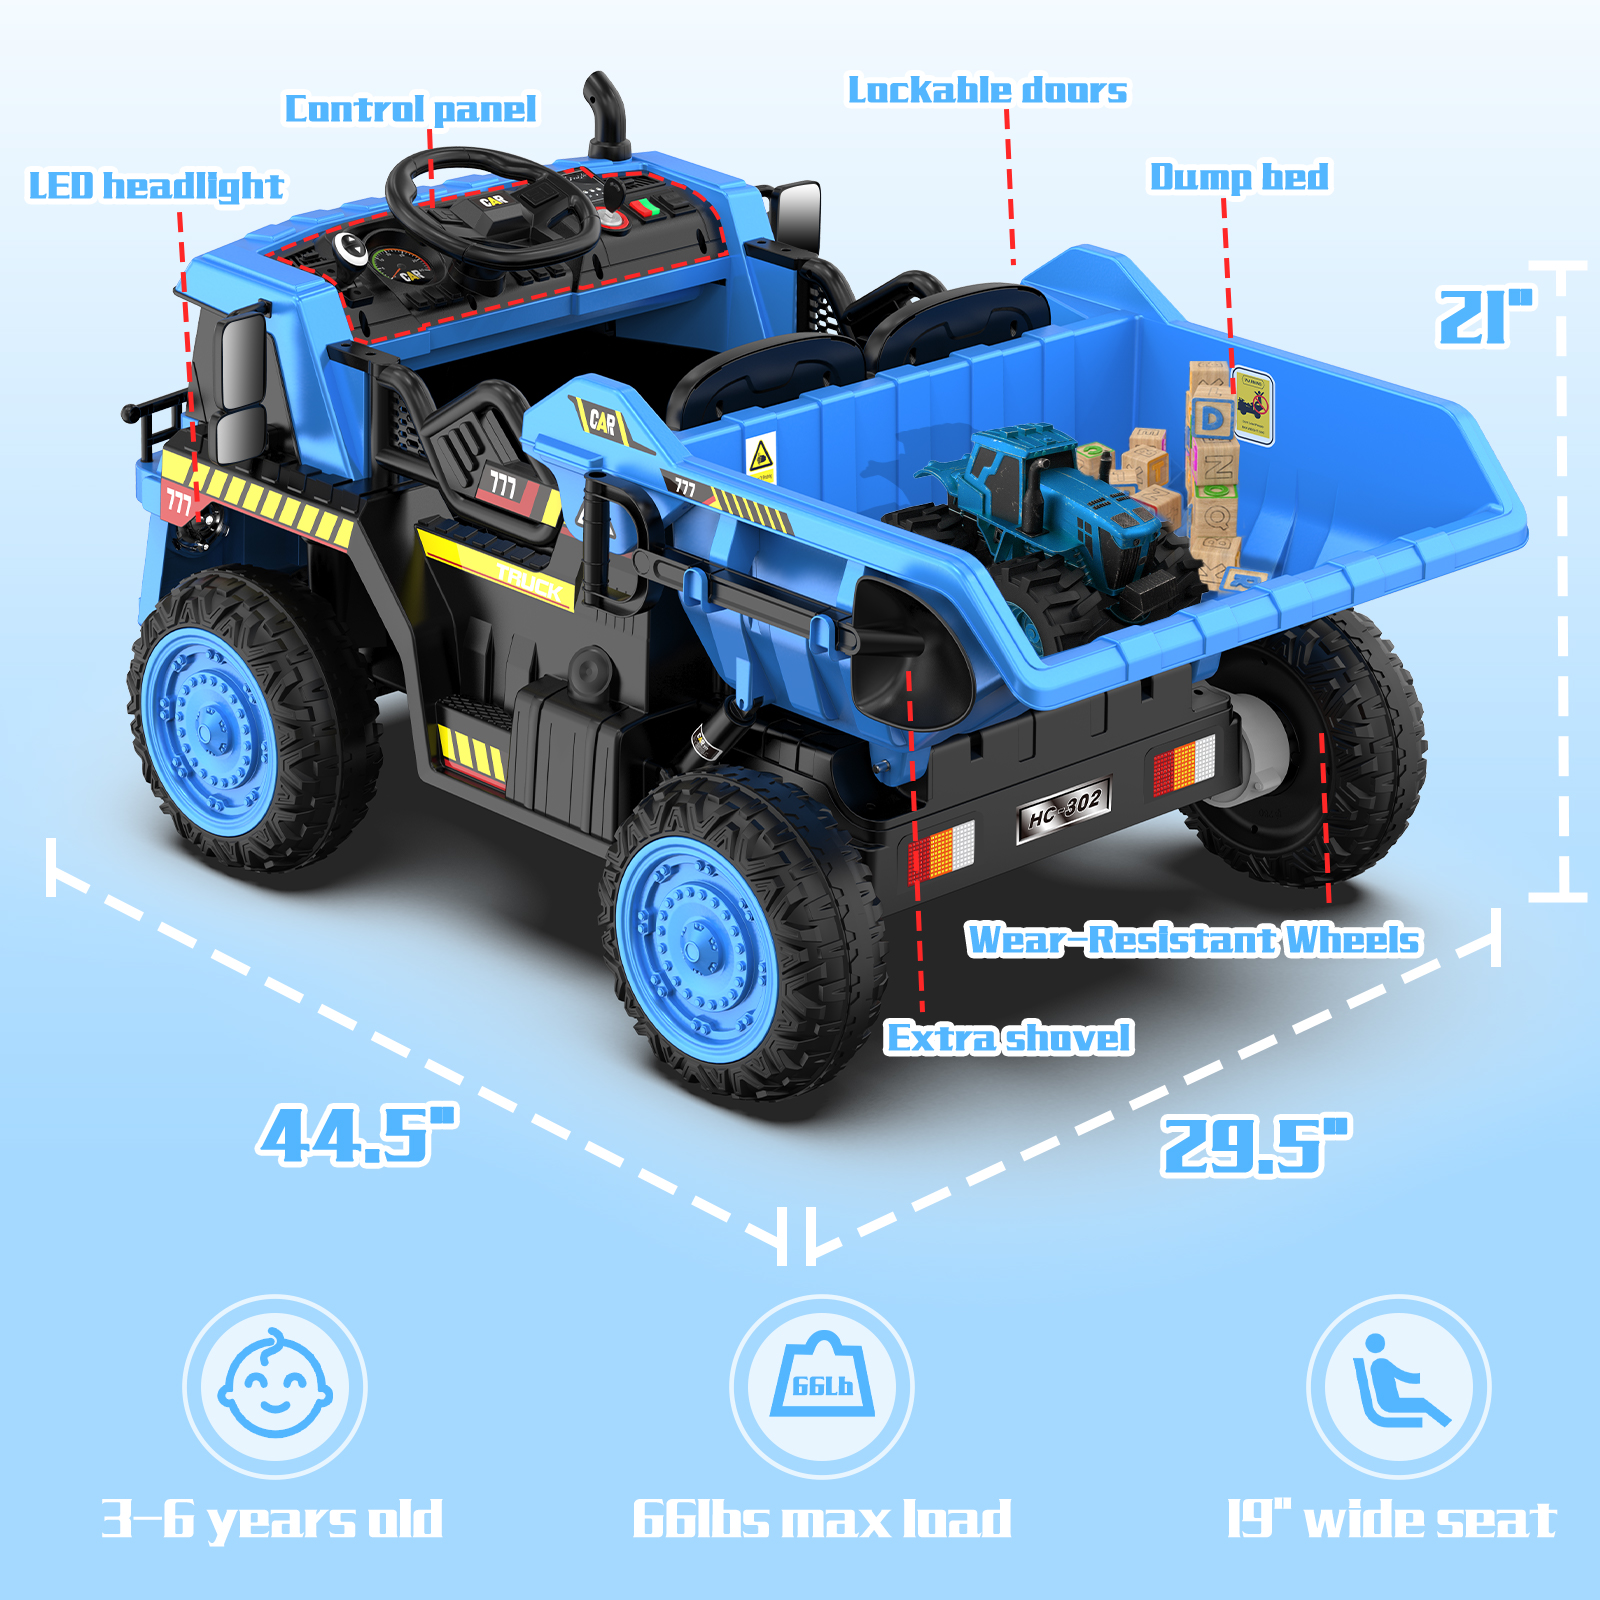 TOKTOO 12V Powered Ride on Dump Truck, Kid Electric Car with Remote Control, Music Player, Electric Dump Bed-Blue - image 3 of 13